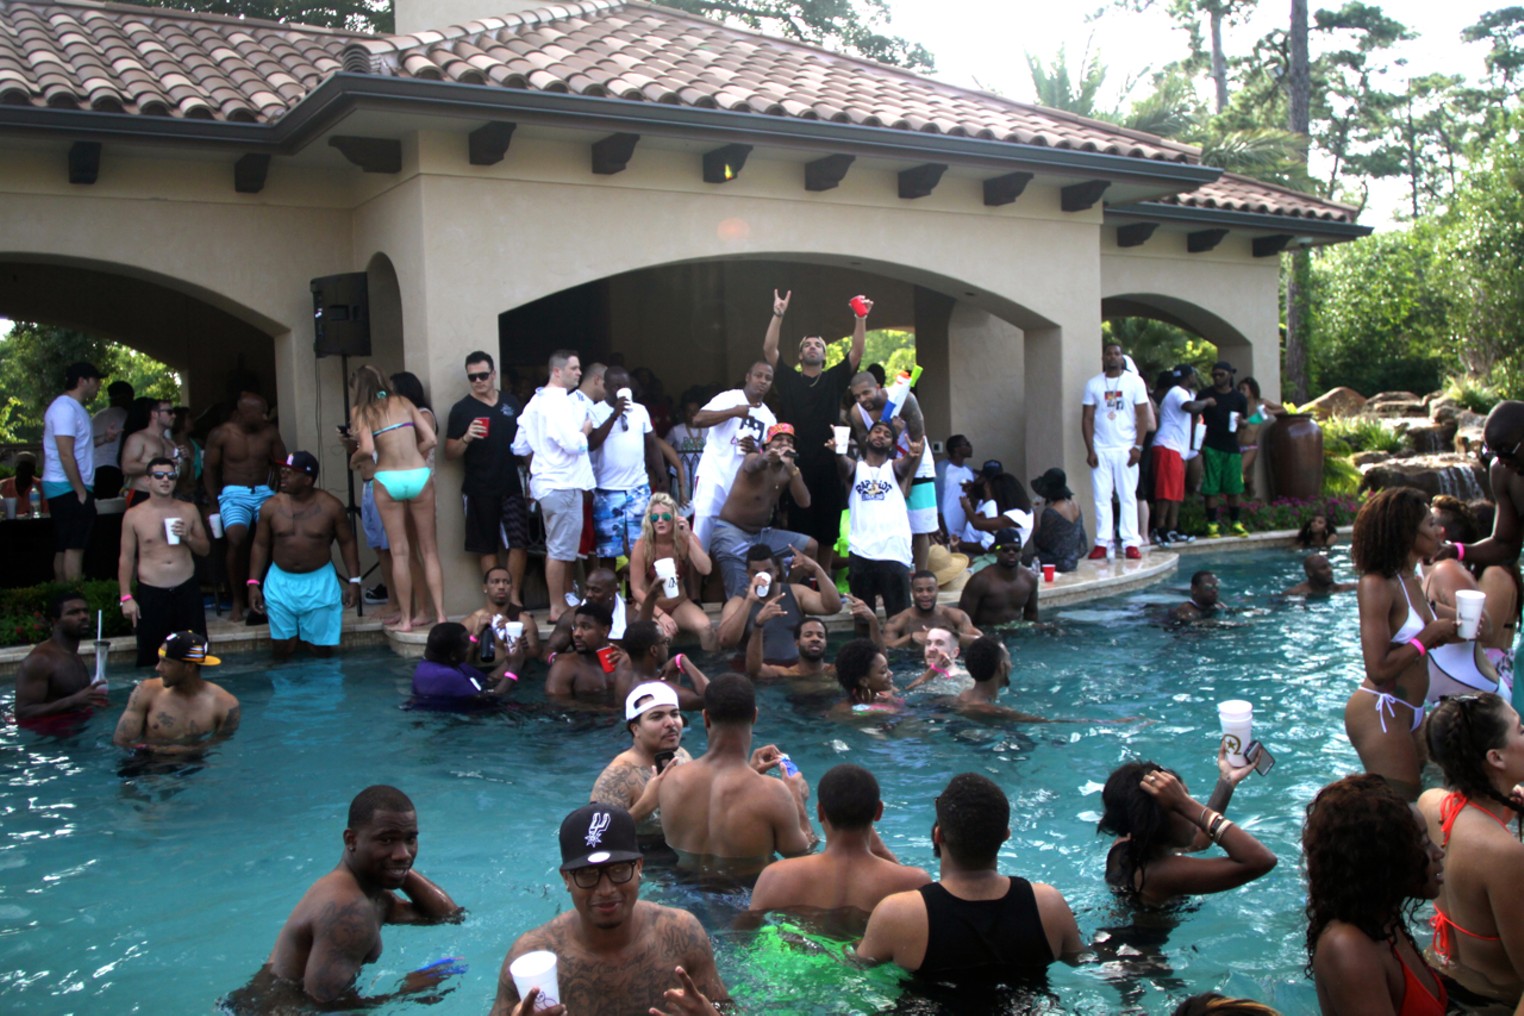 Houston Appreciation Weekend Drake's pool party at Cle nightclub